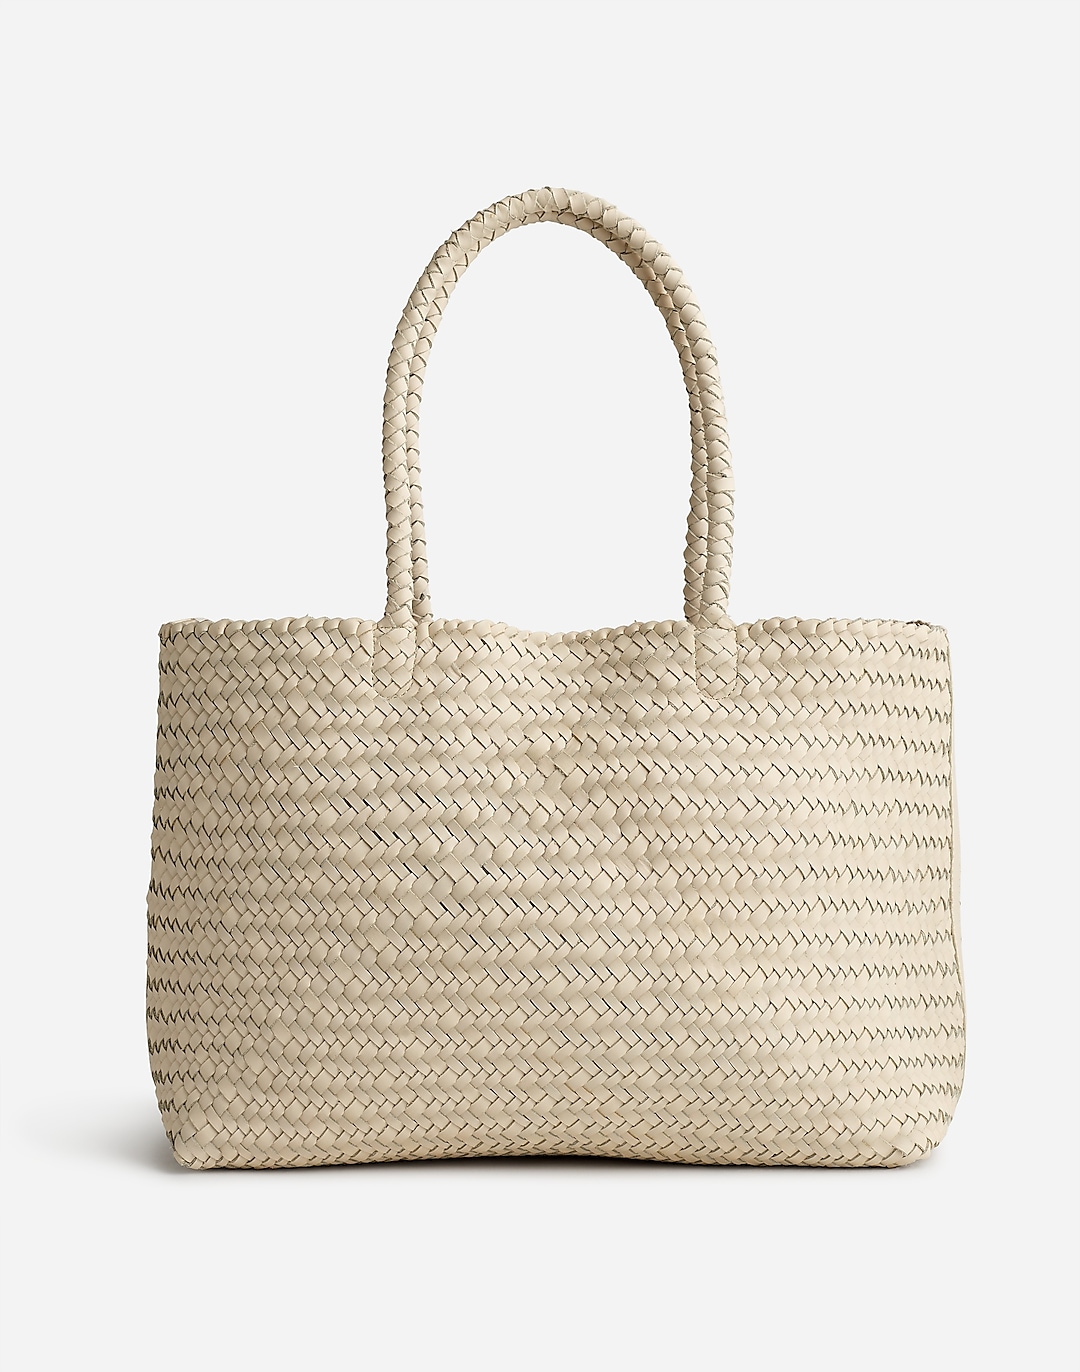 Handwoven Leather Tote | Madewell